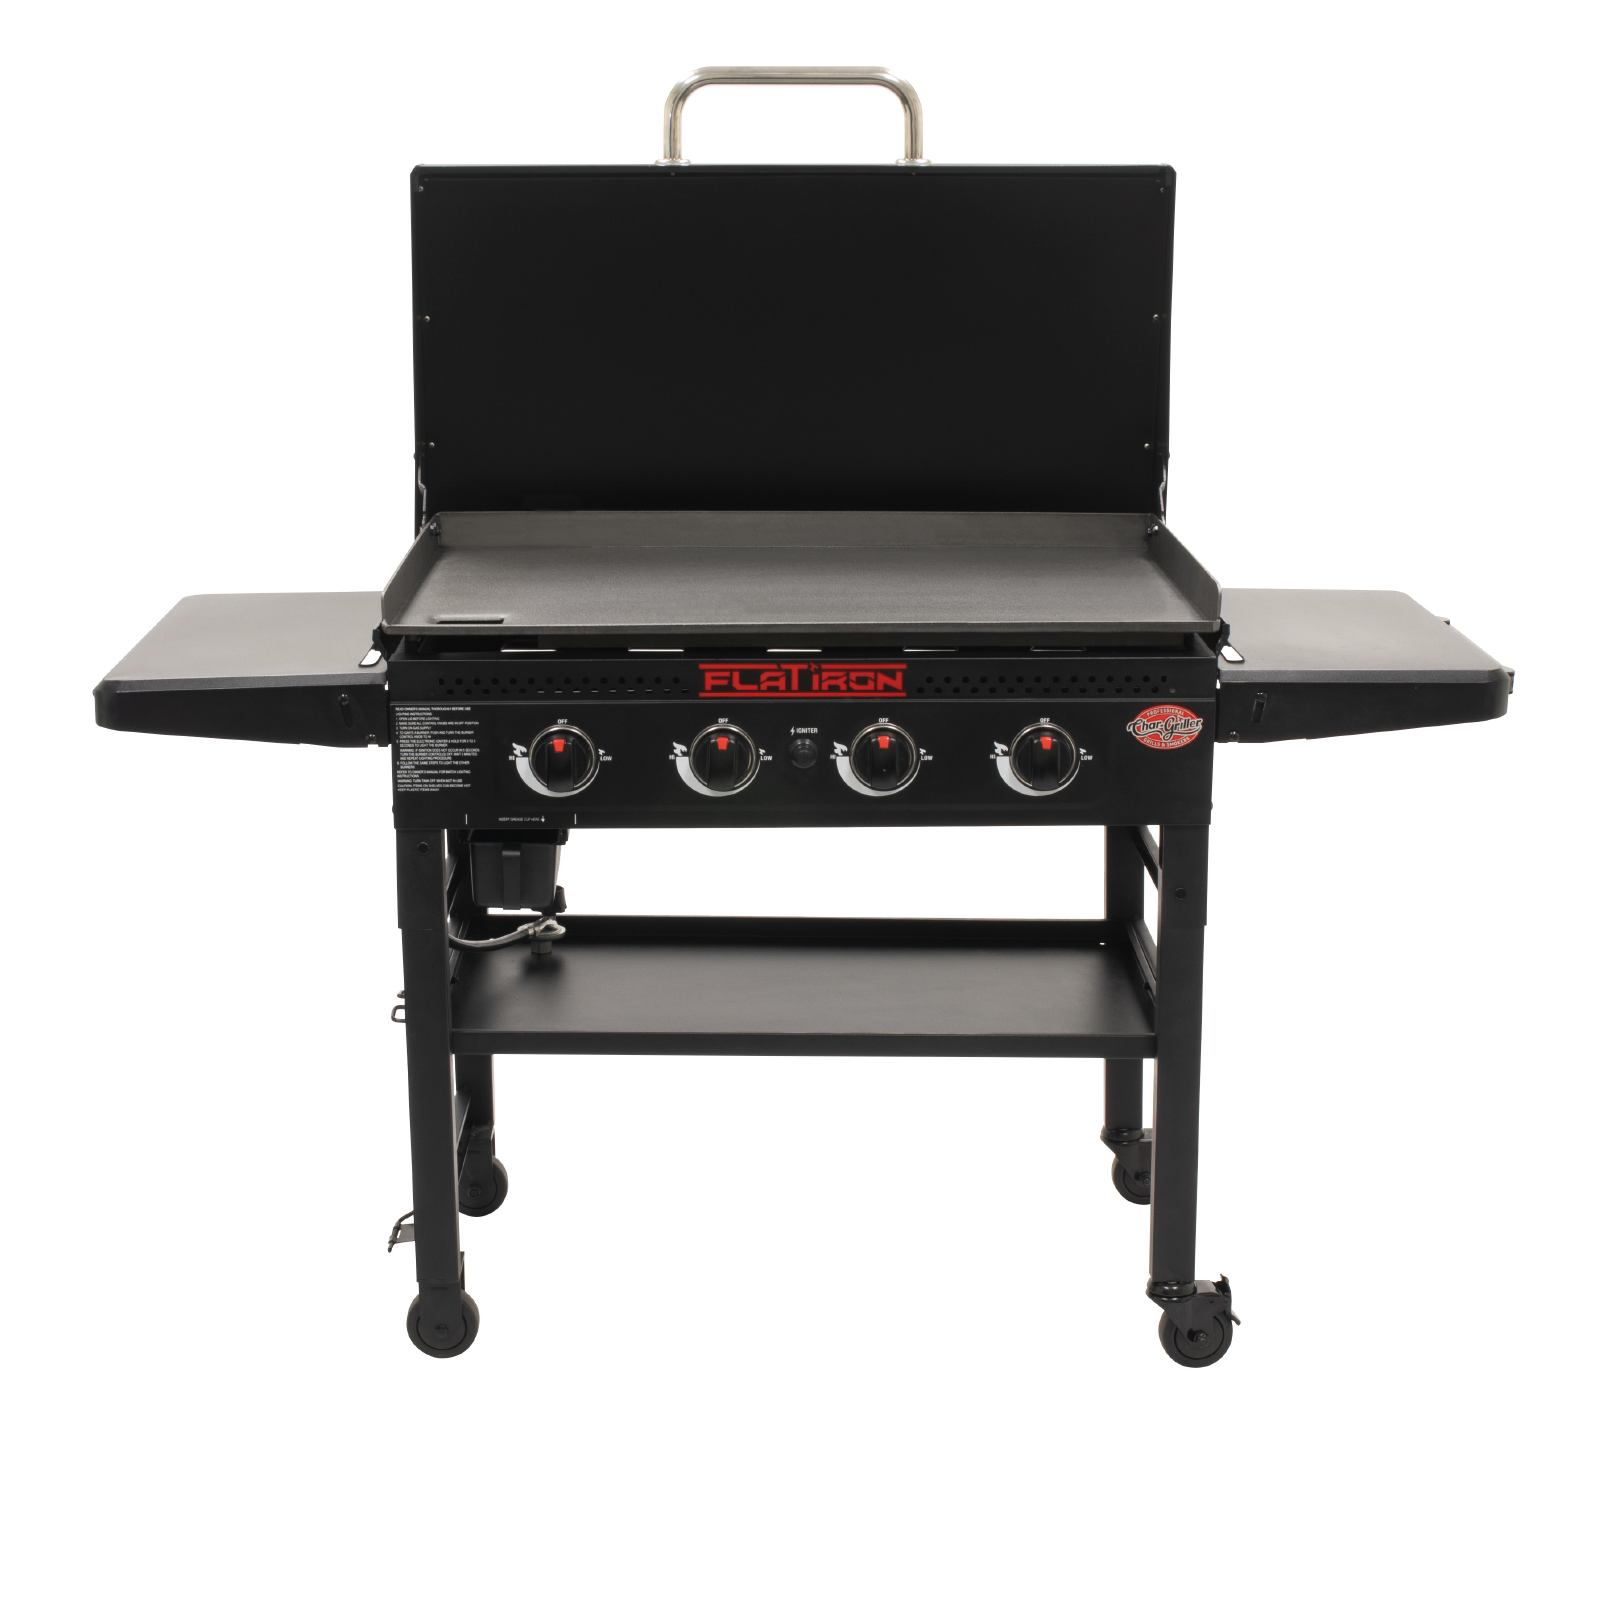  Char-Griller 8933 Flat Iron Gas Griddle Breakfast Kit Barbecue  Tool Set,Black : Patio, Lawn & Garden